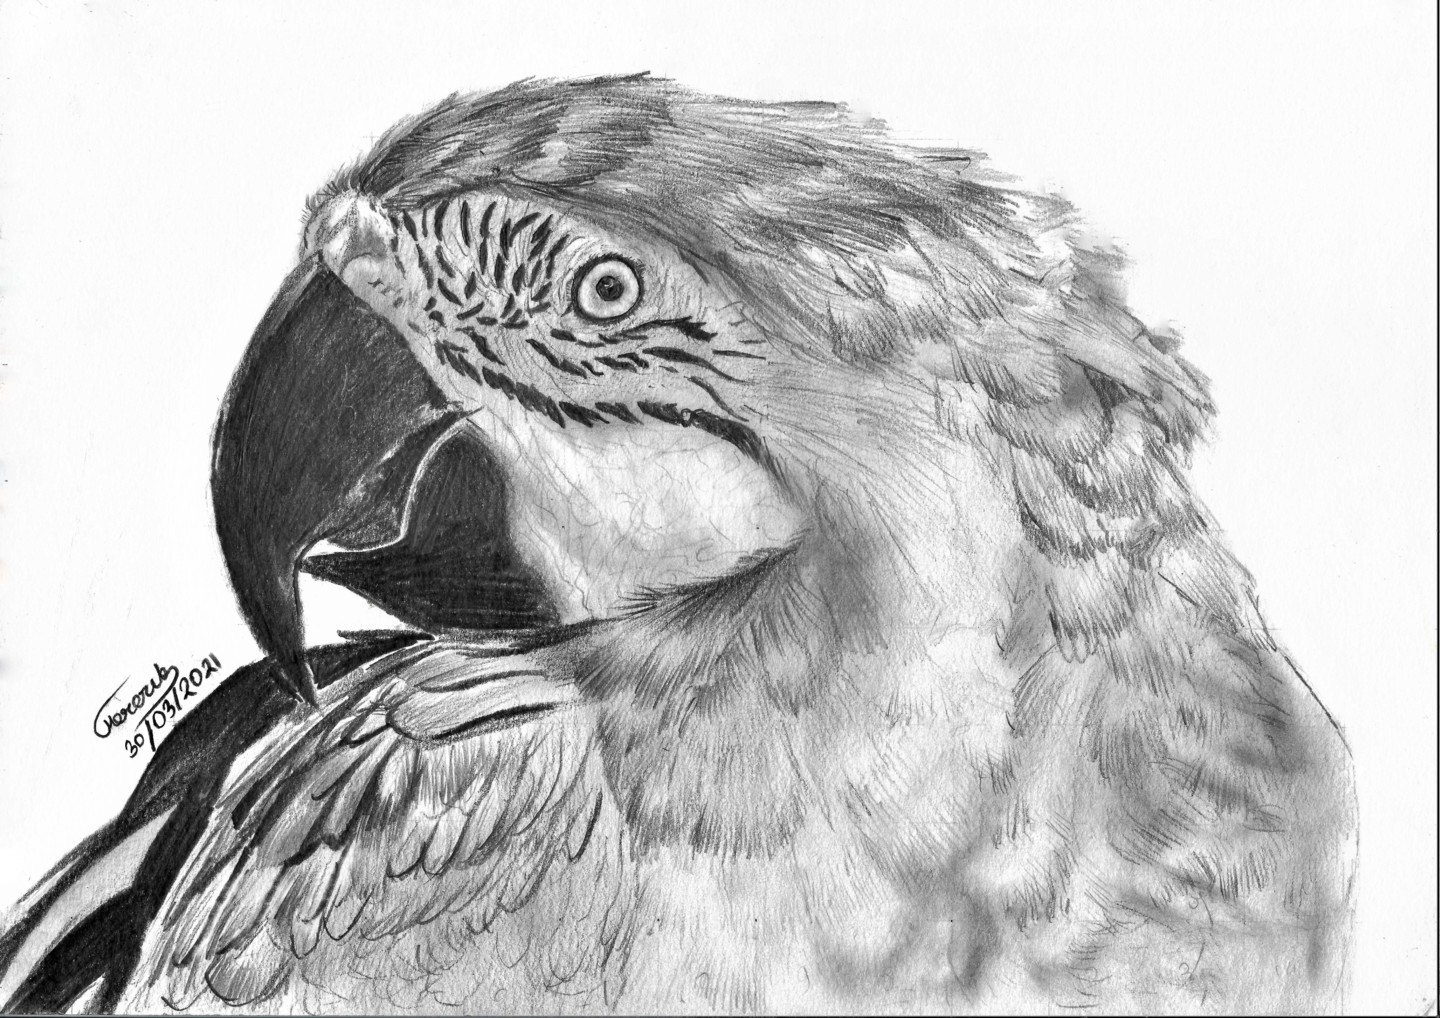 macaw parrot drawing